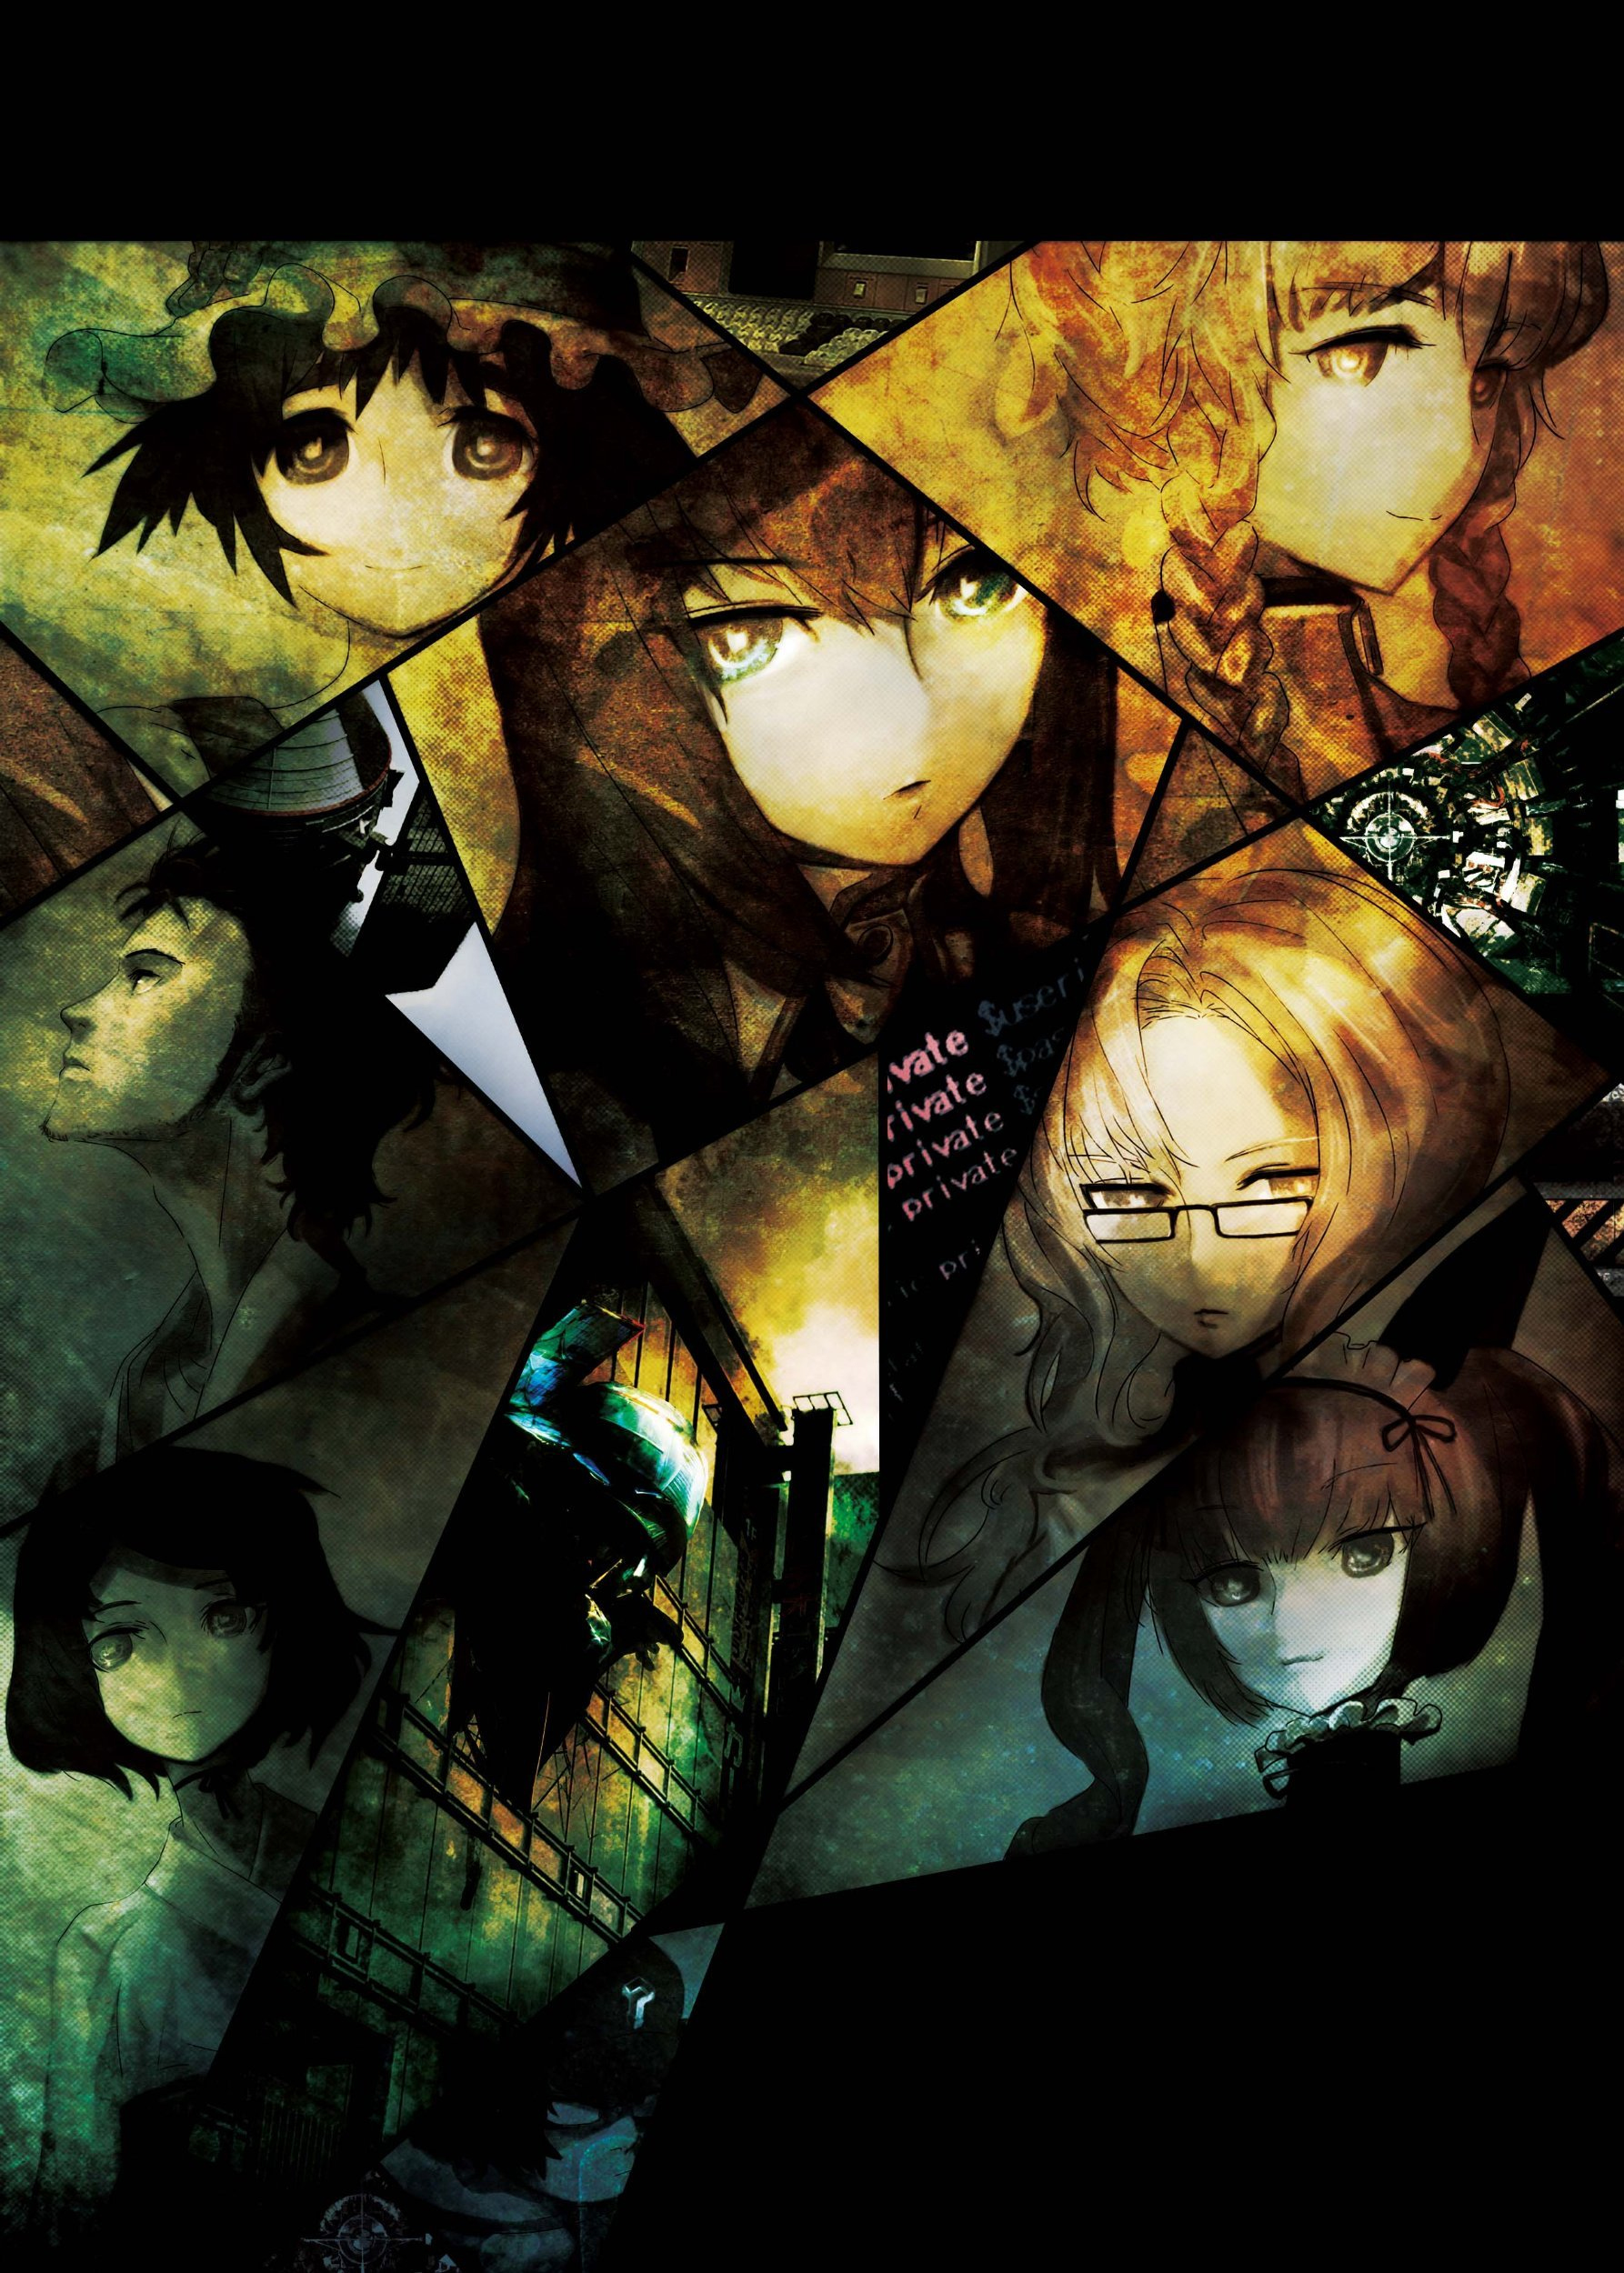 Steins Gate Phone Wallpapers